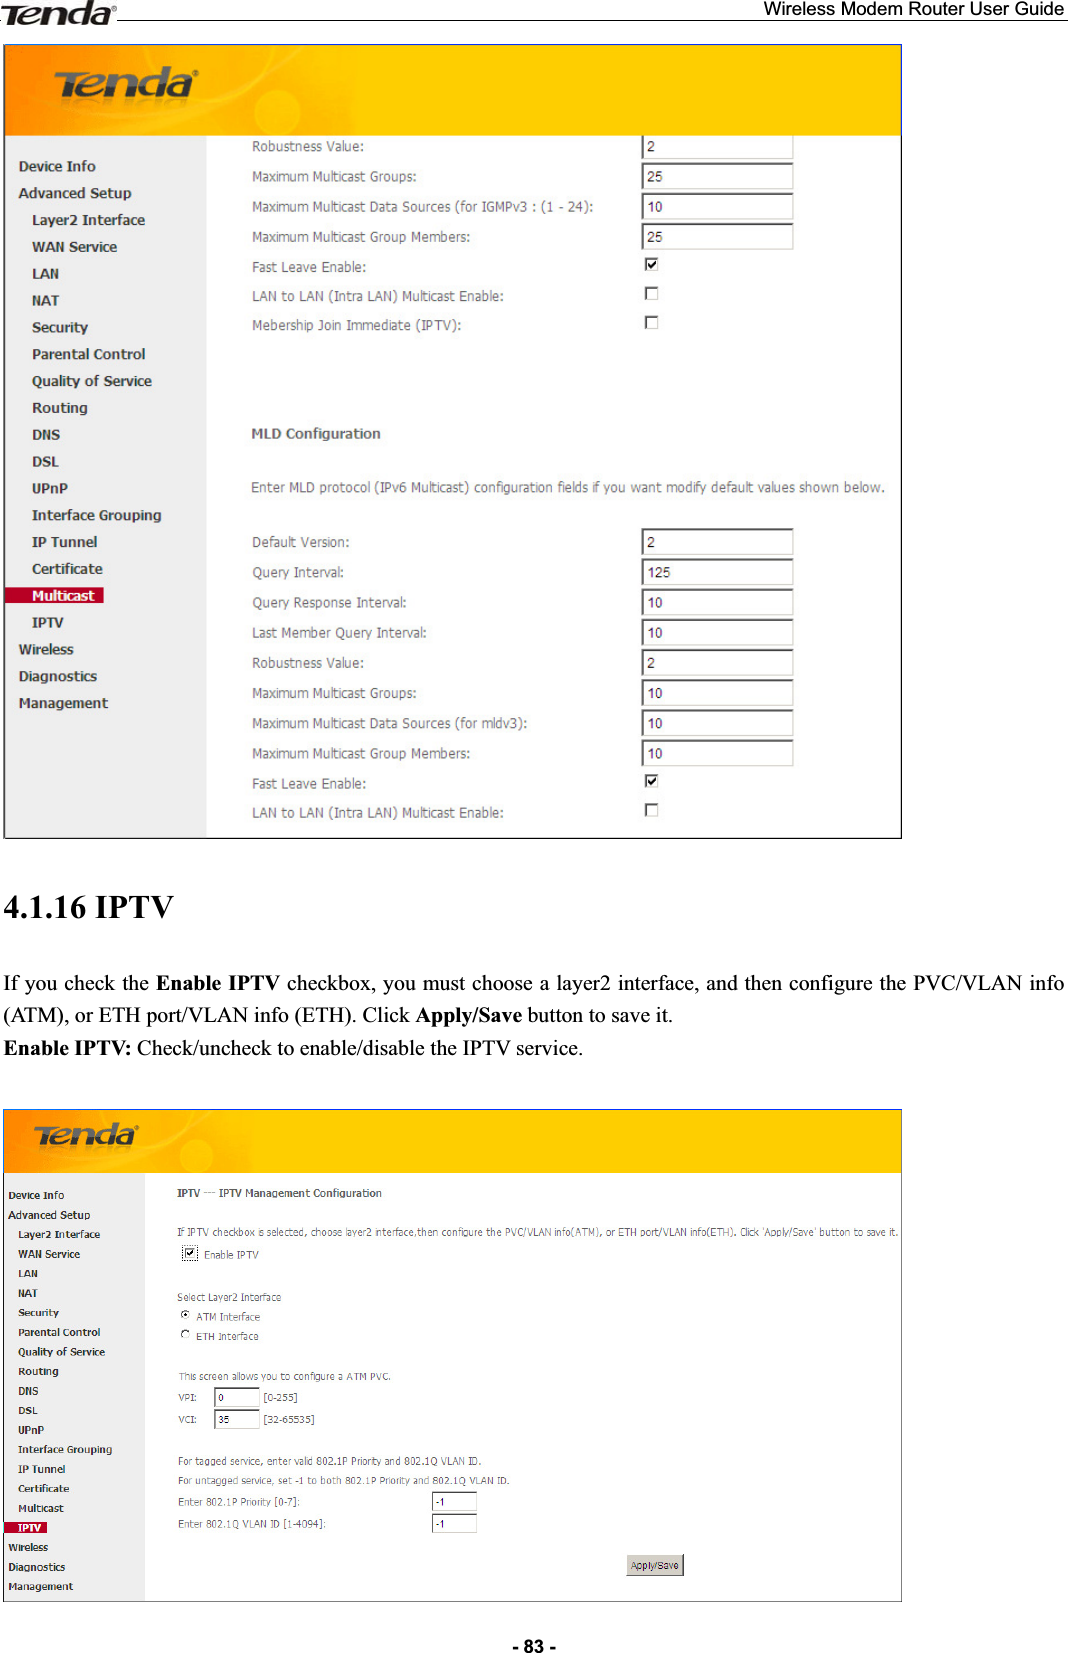 Wireless Modem Router User Guide- 83 -4.1.16 IPTV If you check the Enable IPTV checkbox, you must choose a layer2 interface, and then configure the PVC/VLAN info (ATM), or ETH port/VLAN info (ETH). Click Apply/Save button to save it.   Enable IPTV: Check/uncheck to enable/disable the IPTV service. 